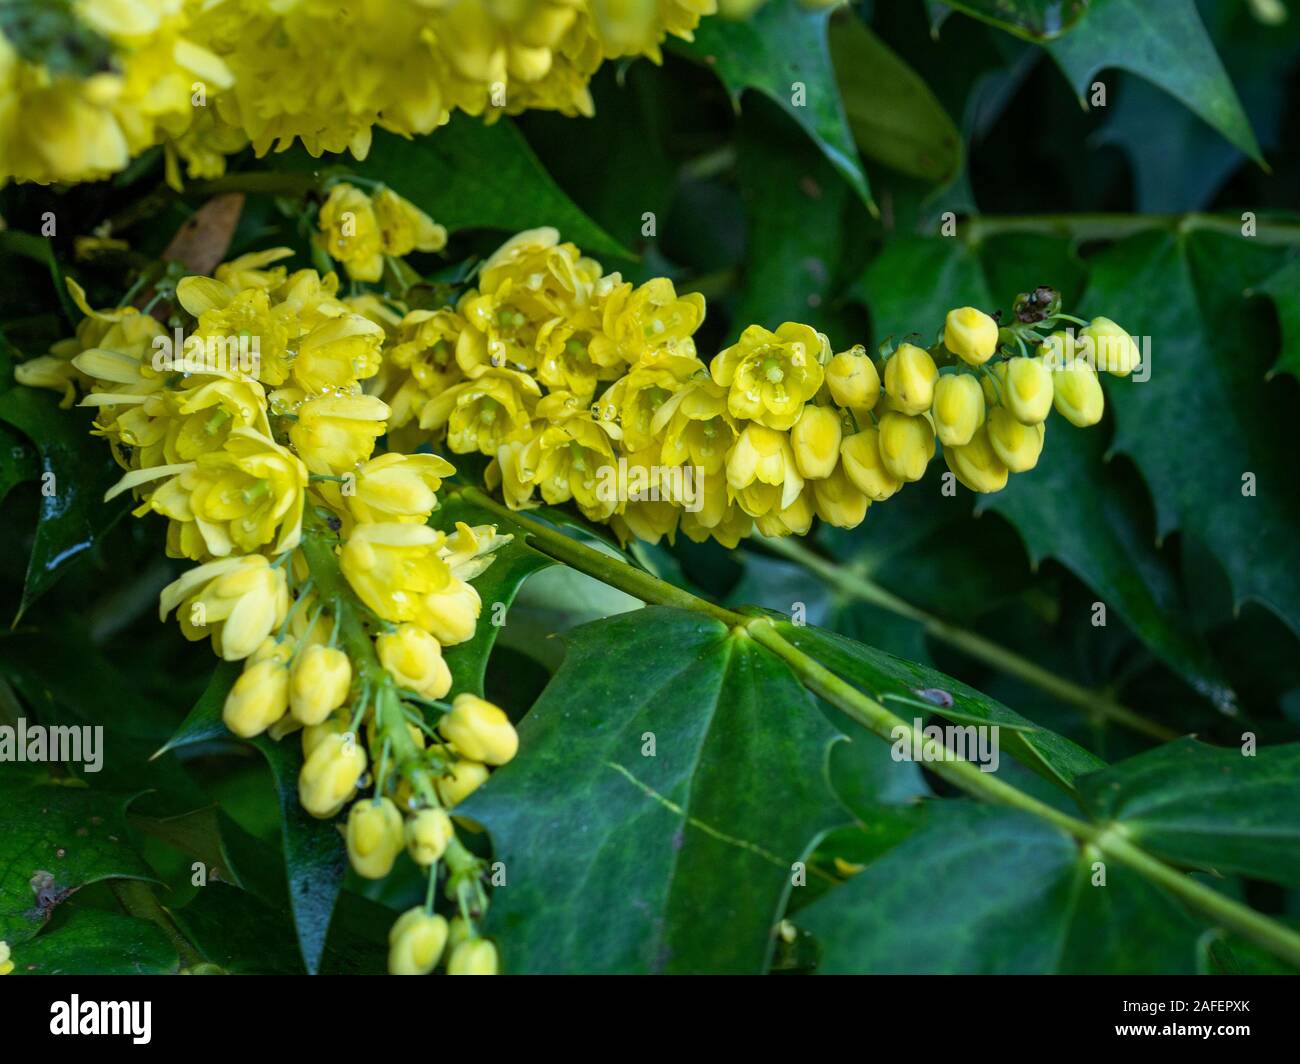 Closeup of the beautiful bright yellow flowers and green leaves of a Mahonia bush Stock Photo